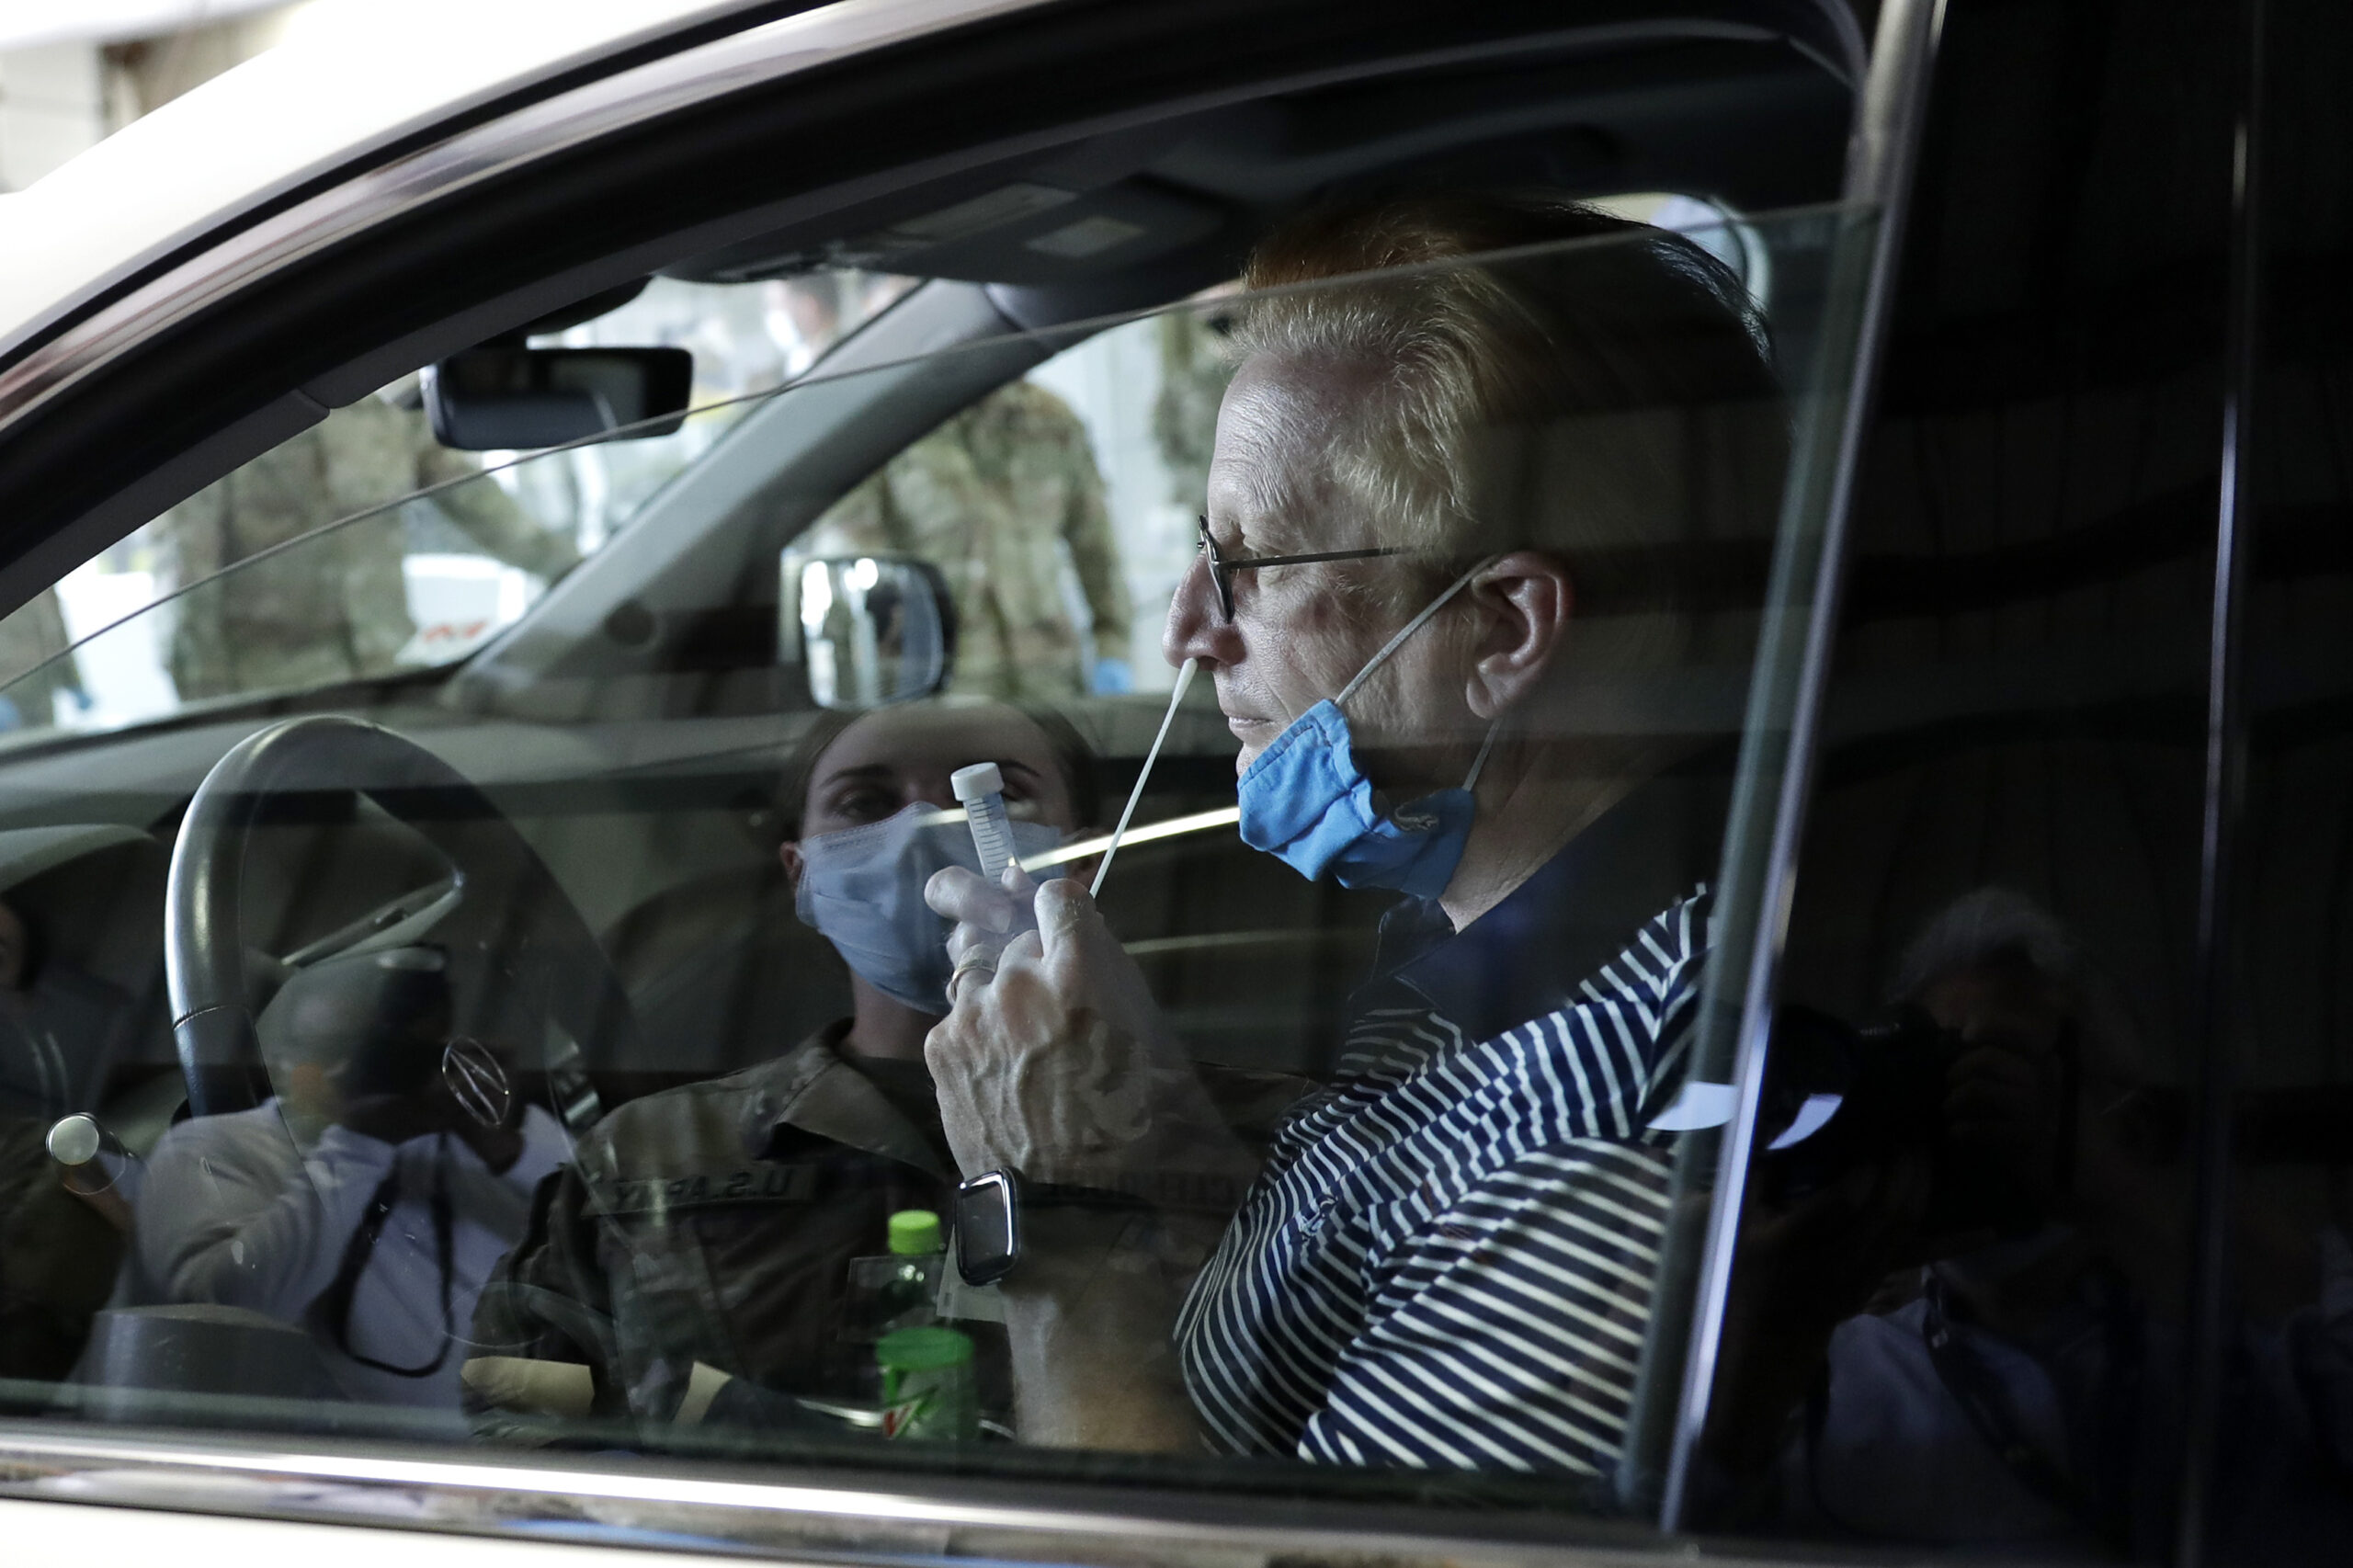 Wayne Taylor gets a free drive-thru COVID-19 test at the testing facility in Waukegan, Ill.